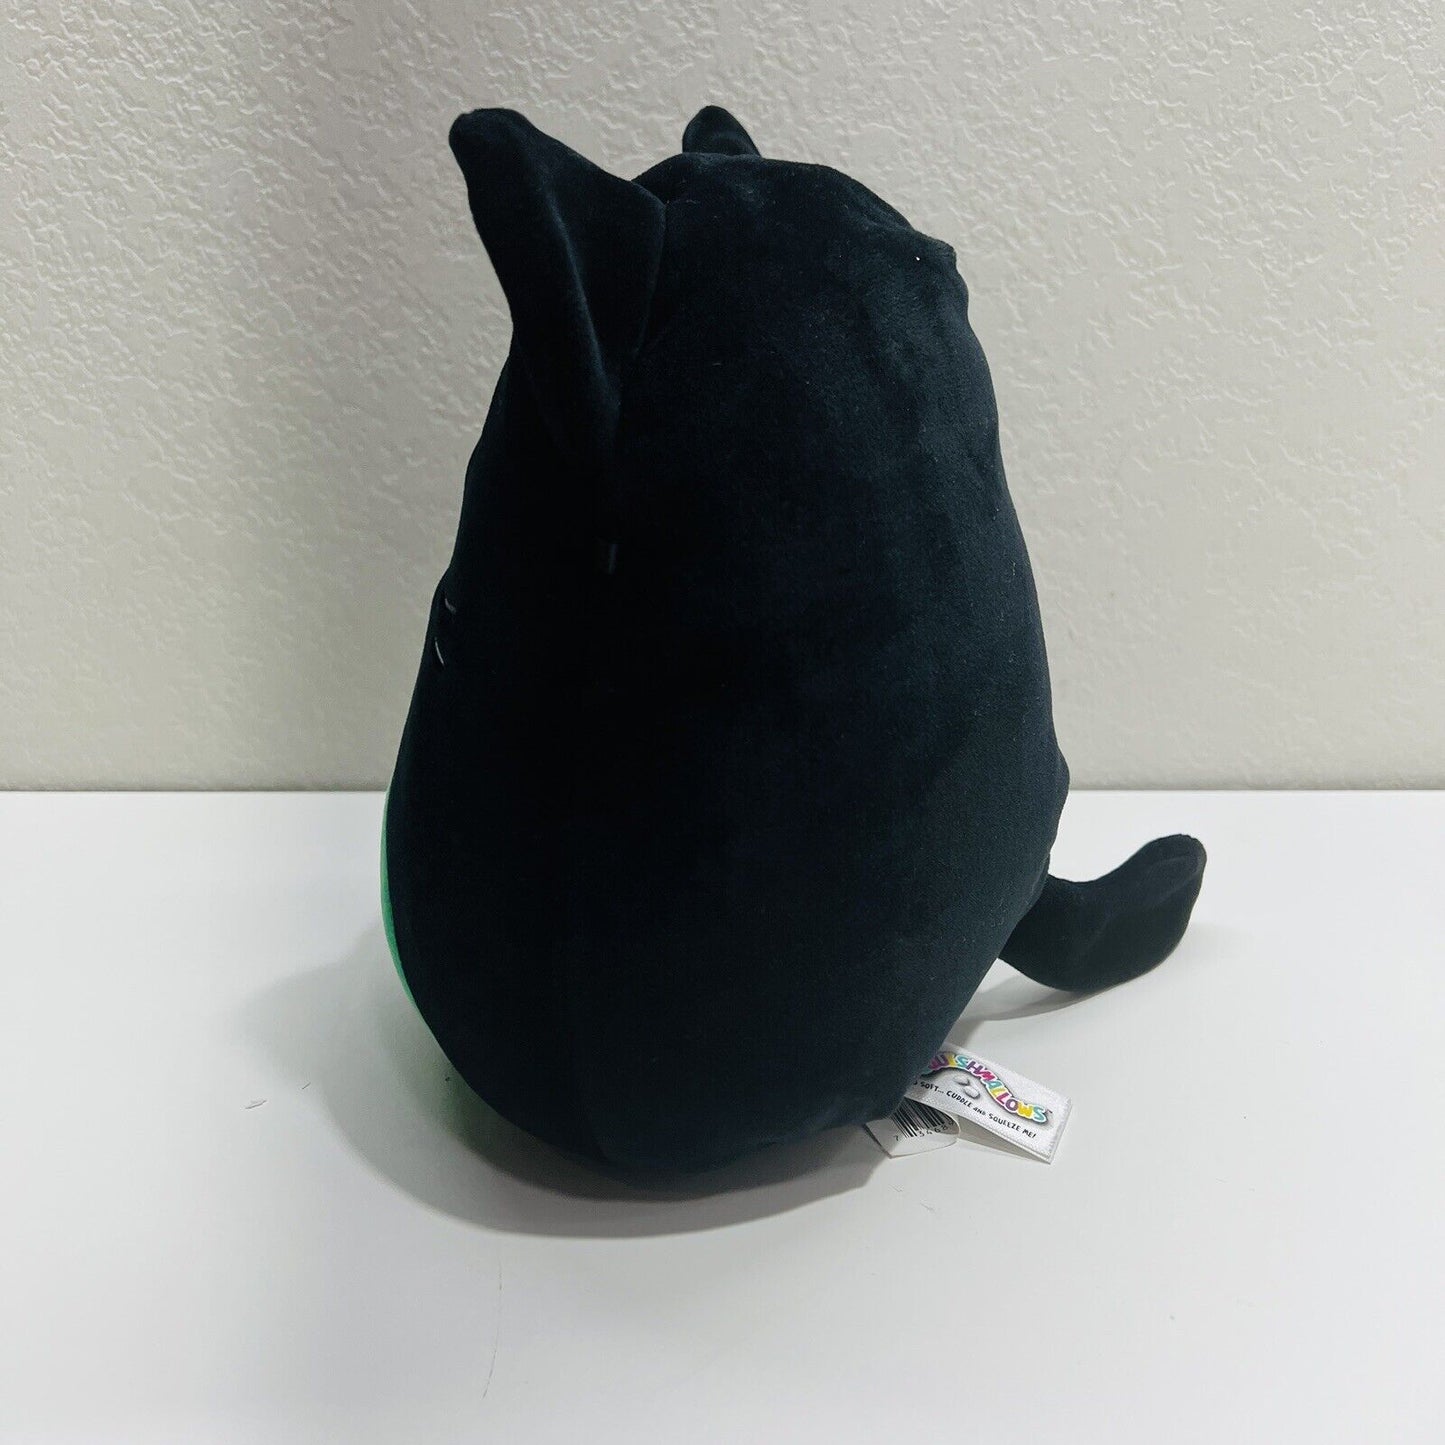 Squishmallow Halloween Cat Plush Kellytoy 8in CLEO The Black and Green Toy